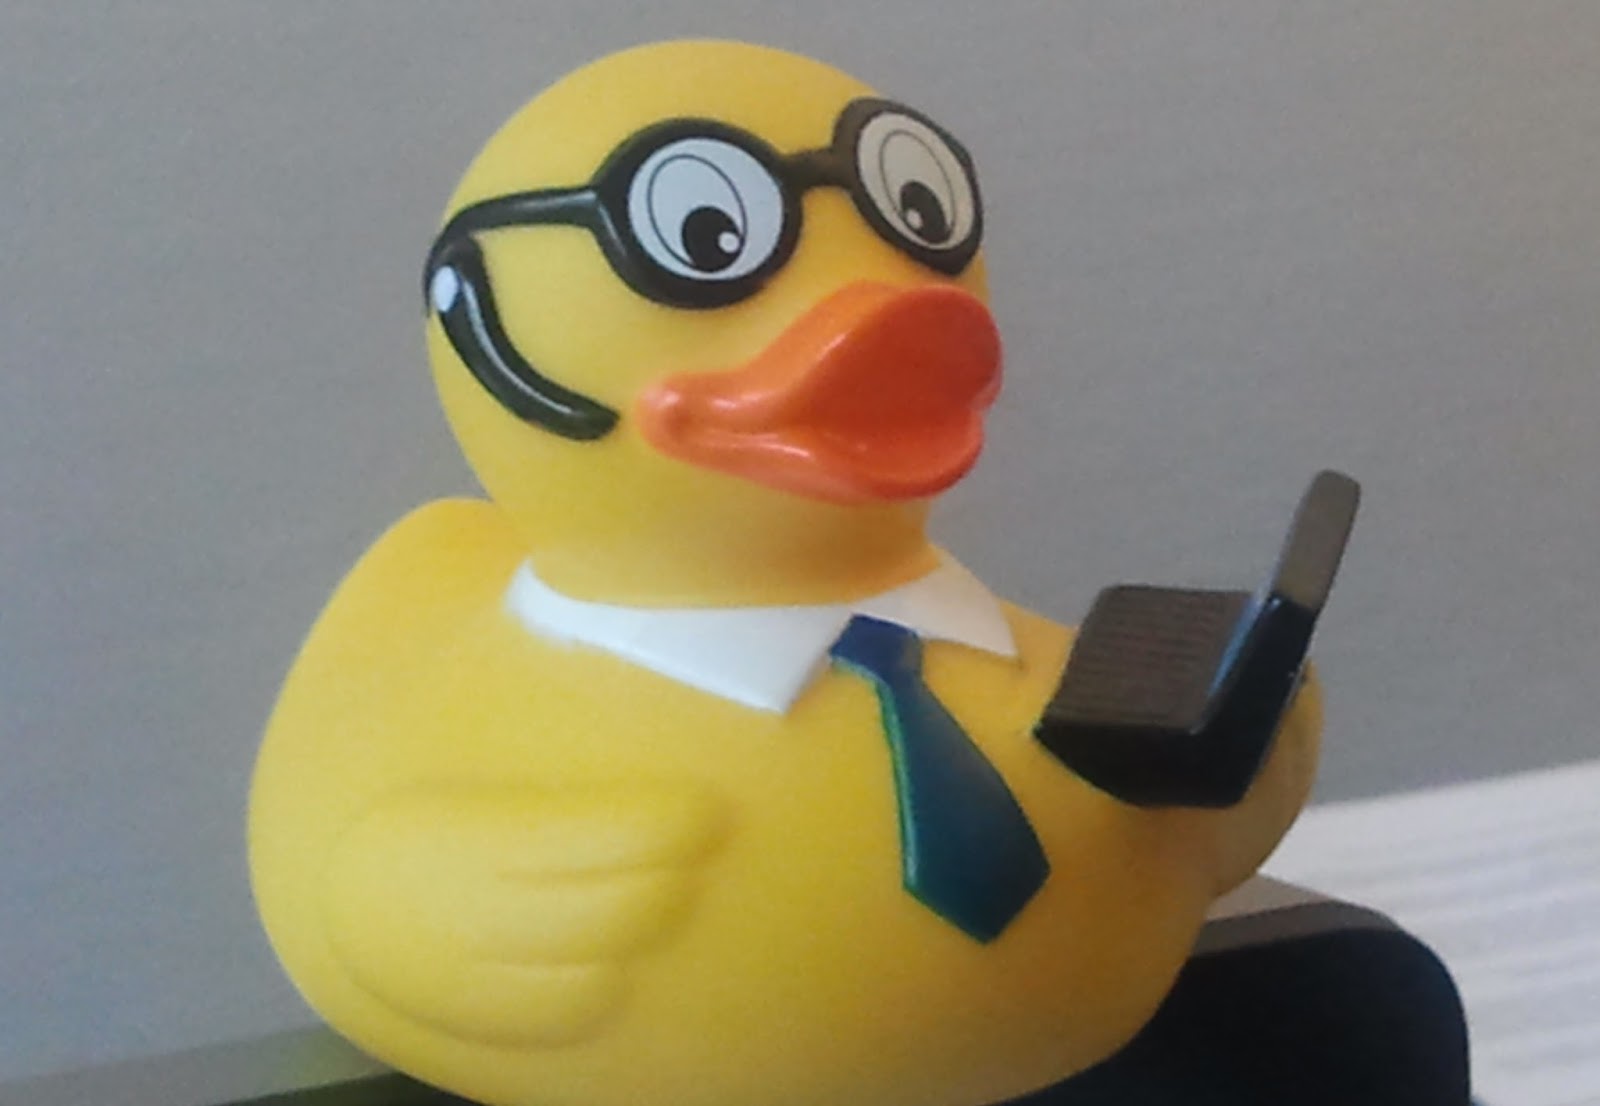 Rubber Ducky Reviews